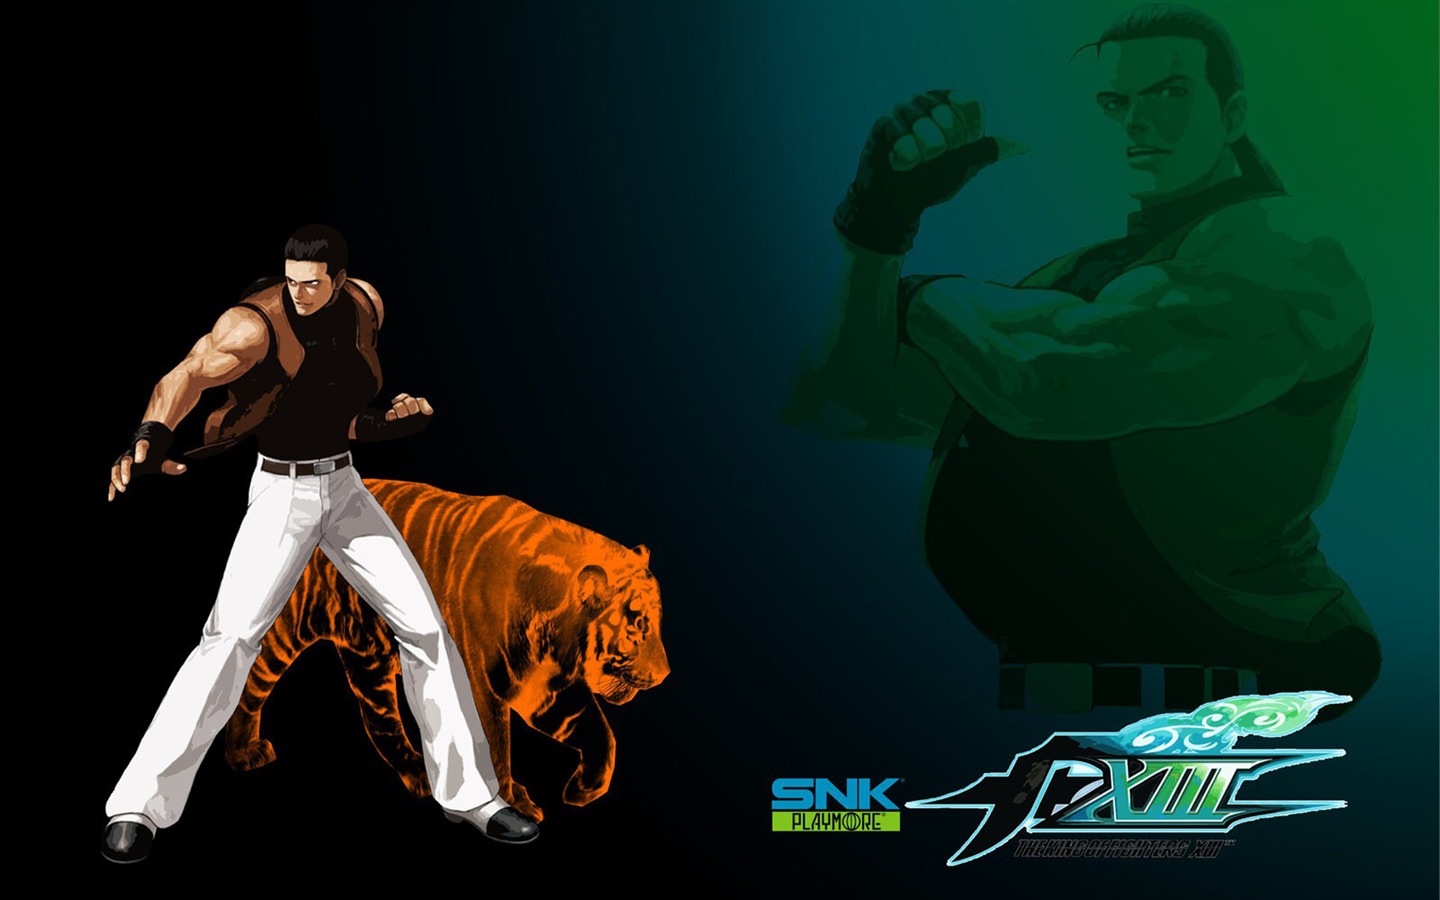 Le roi de wallpapers Fighters XIII #17 - 1440x900